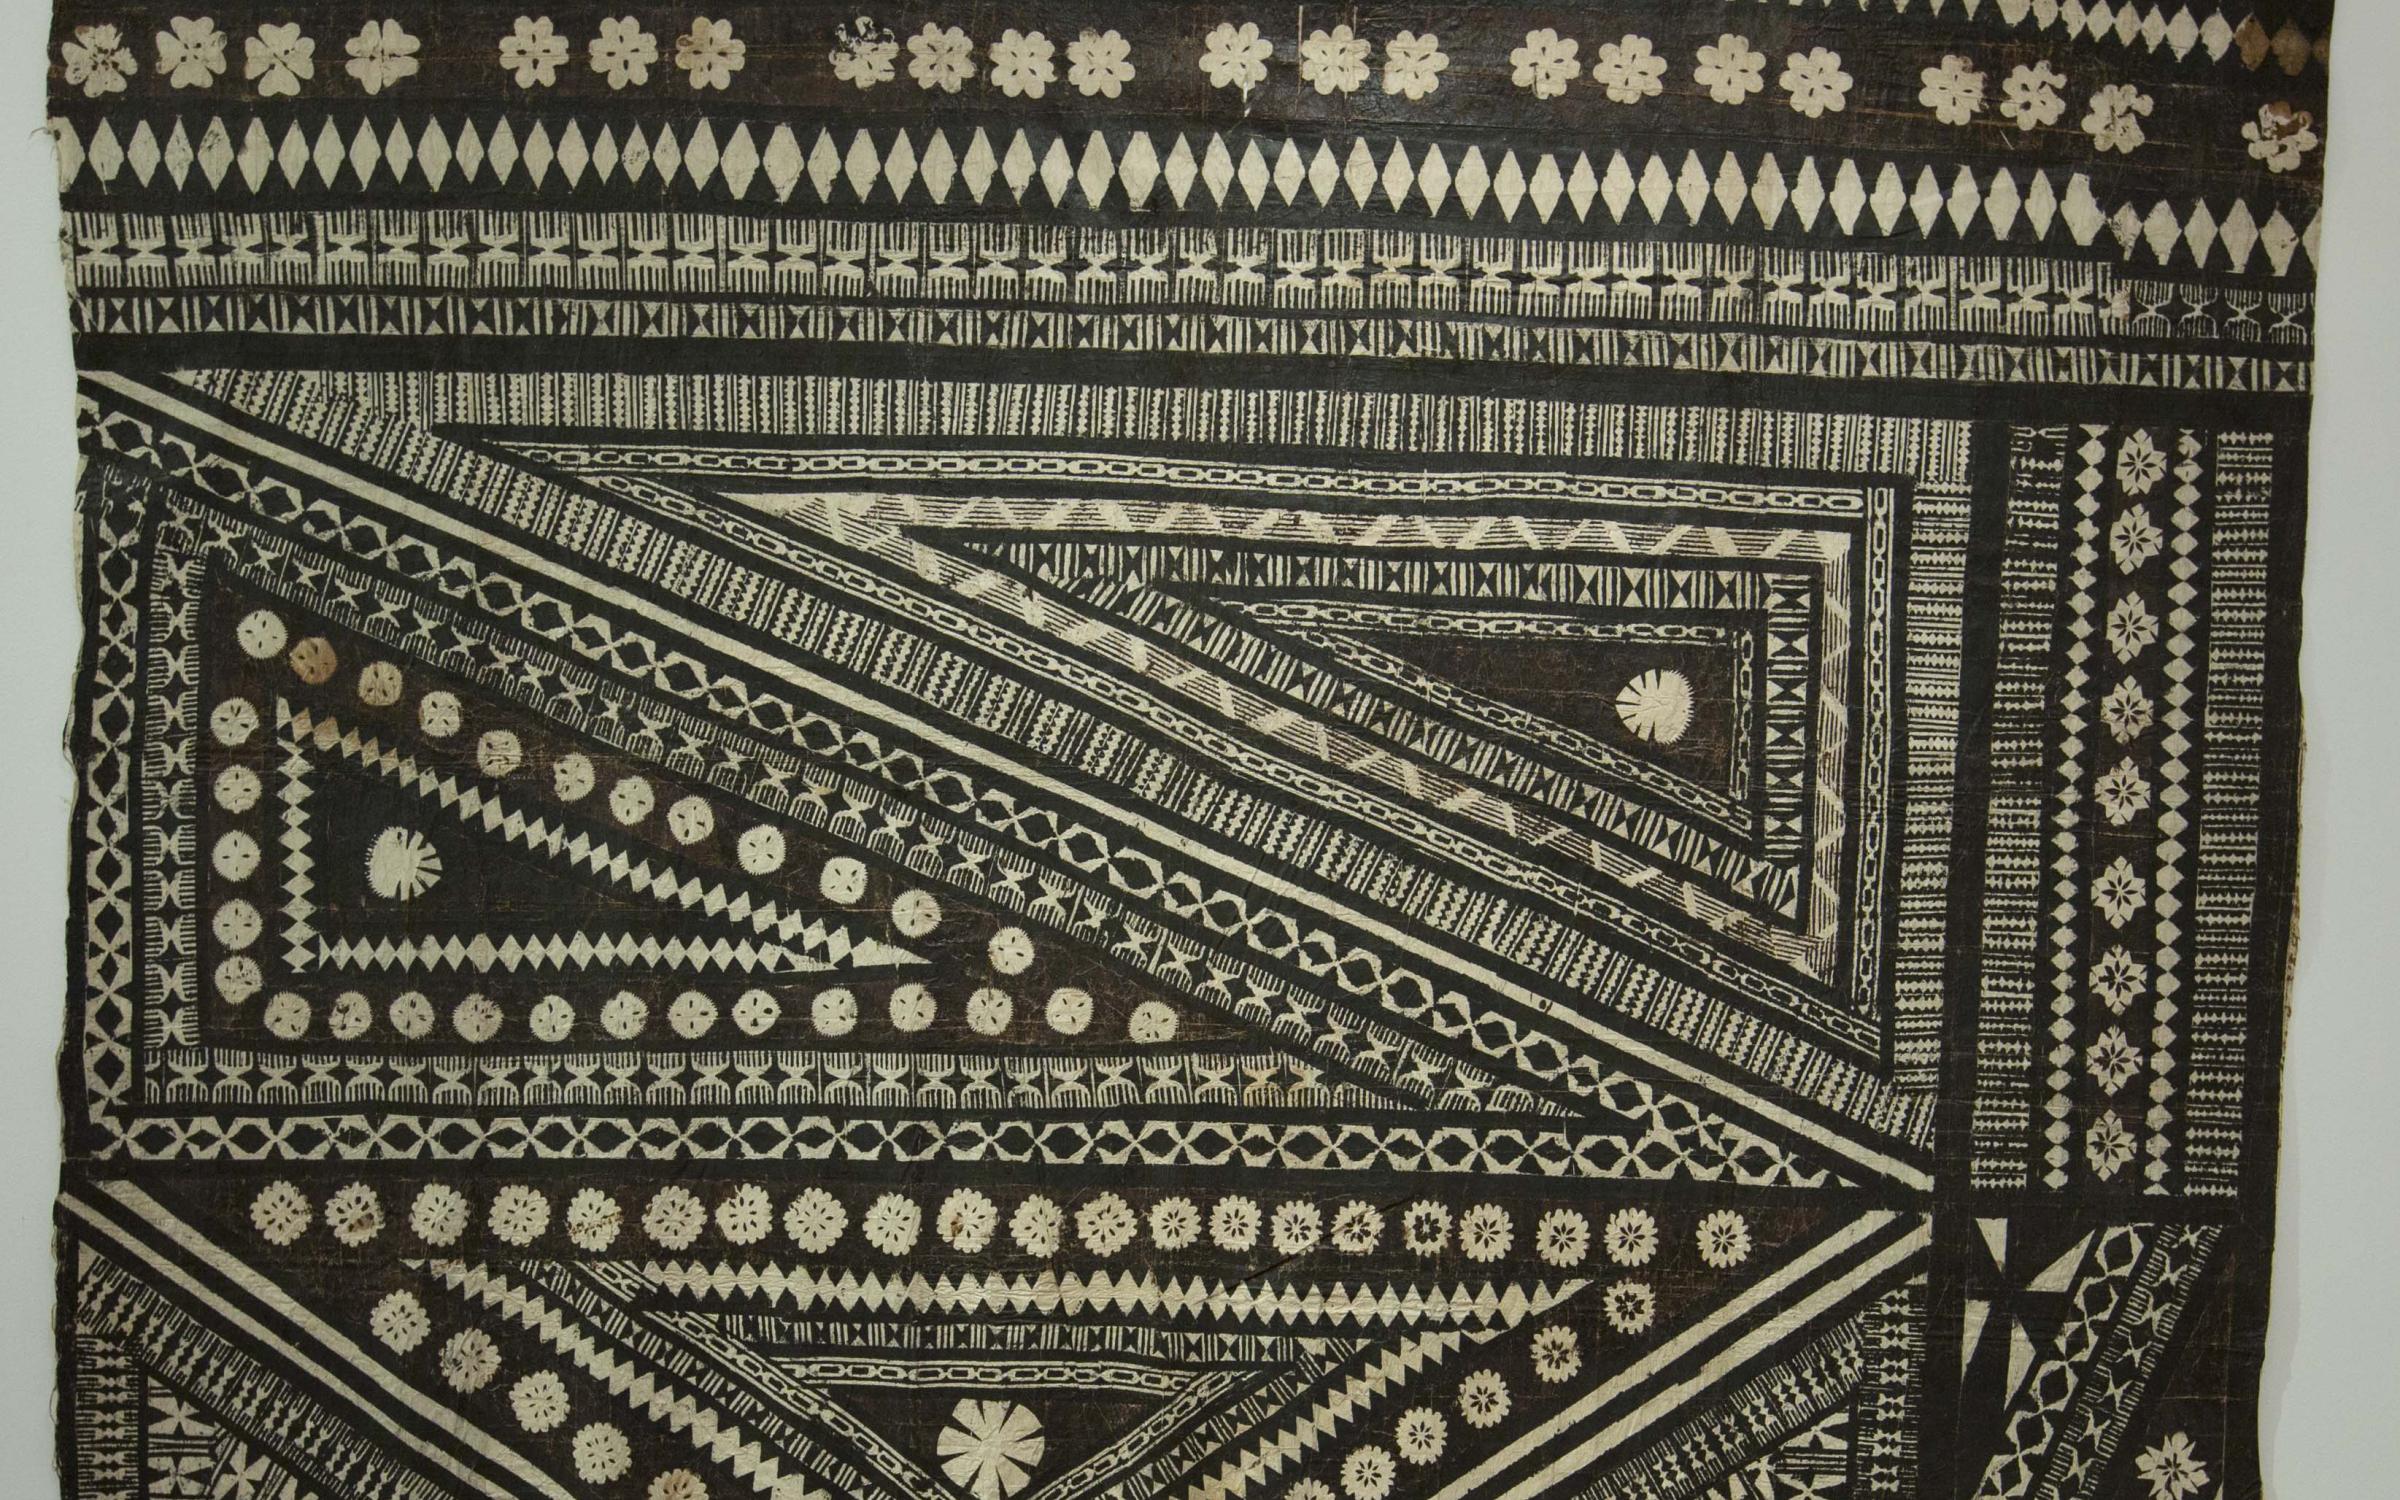  Unidentified artist (Fiji, late 19th or early 20th century) Barkcloth (Masi) fragment, barkcloth, pigment, and resin, 103 3/4 x 95 in, gift of the Peacock Revocable Trust, UMFA2005.1.31.